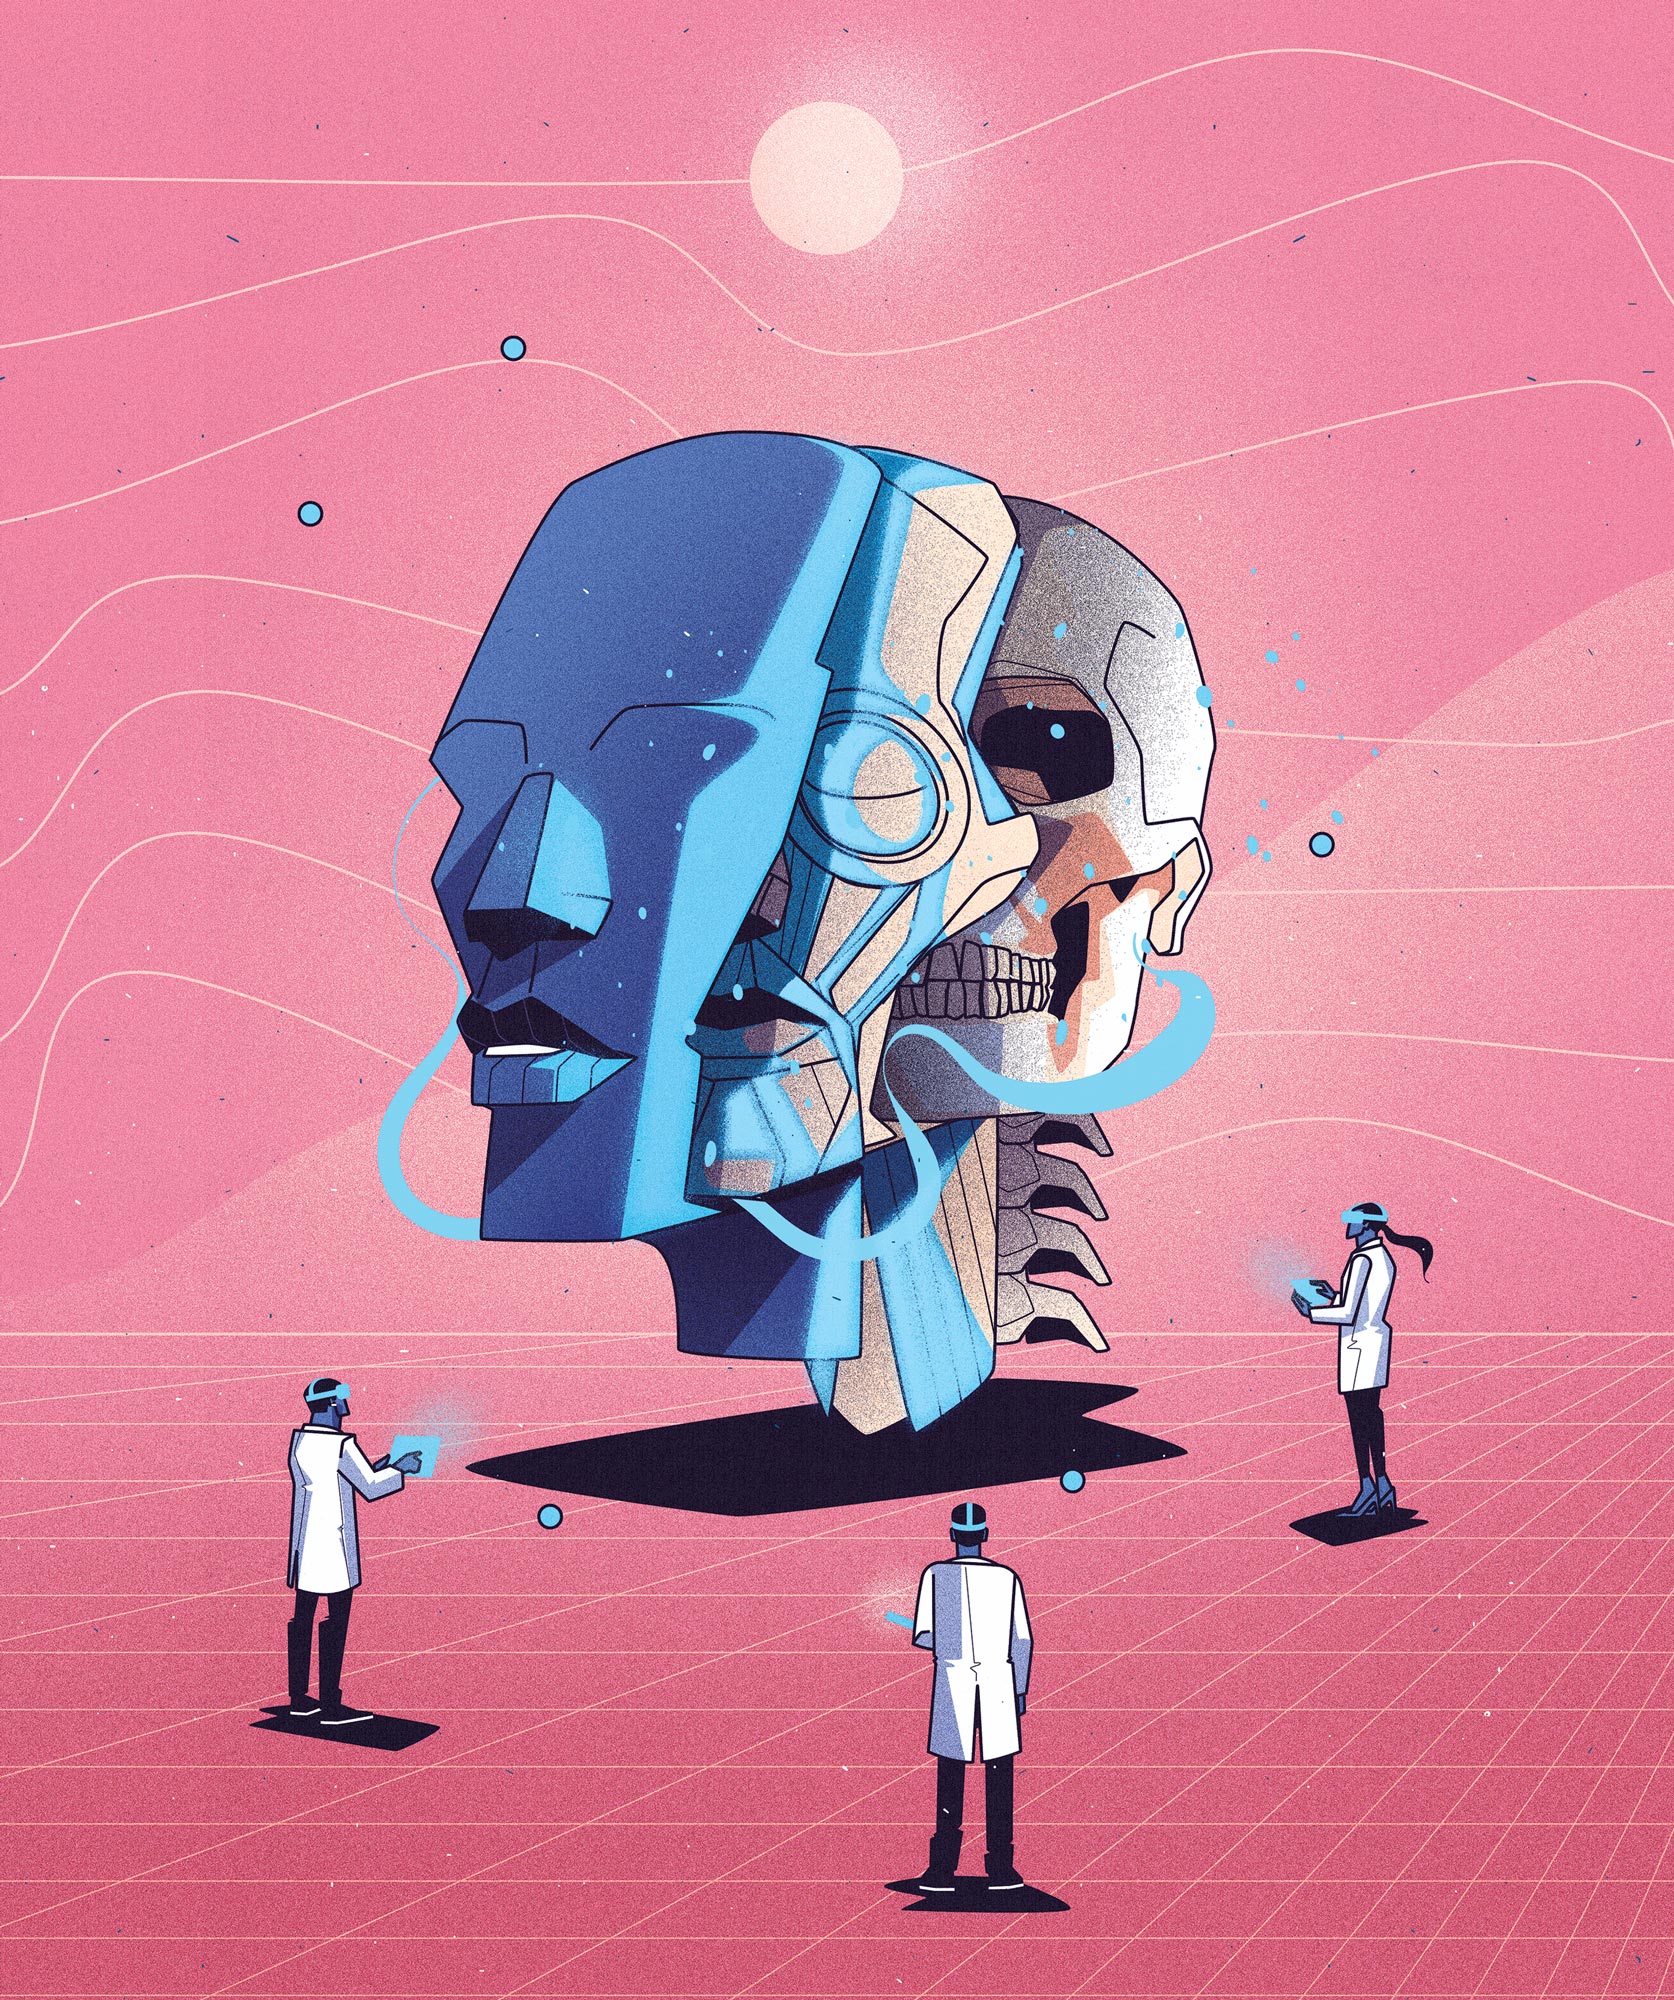 On a pink background, three small figures in lap coats observe a floating blue human head. The head is bisected to reveal three layers: skin, musculature, and skeleton.